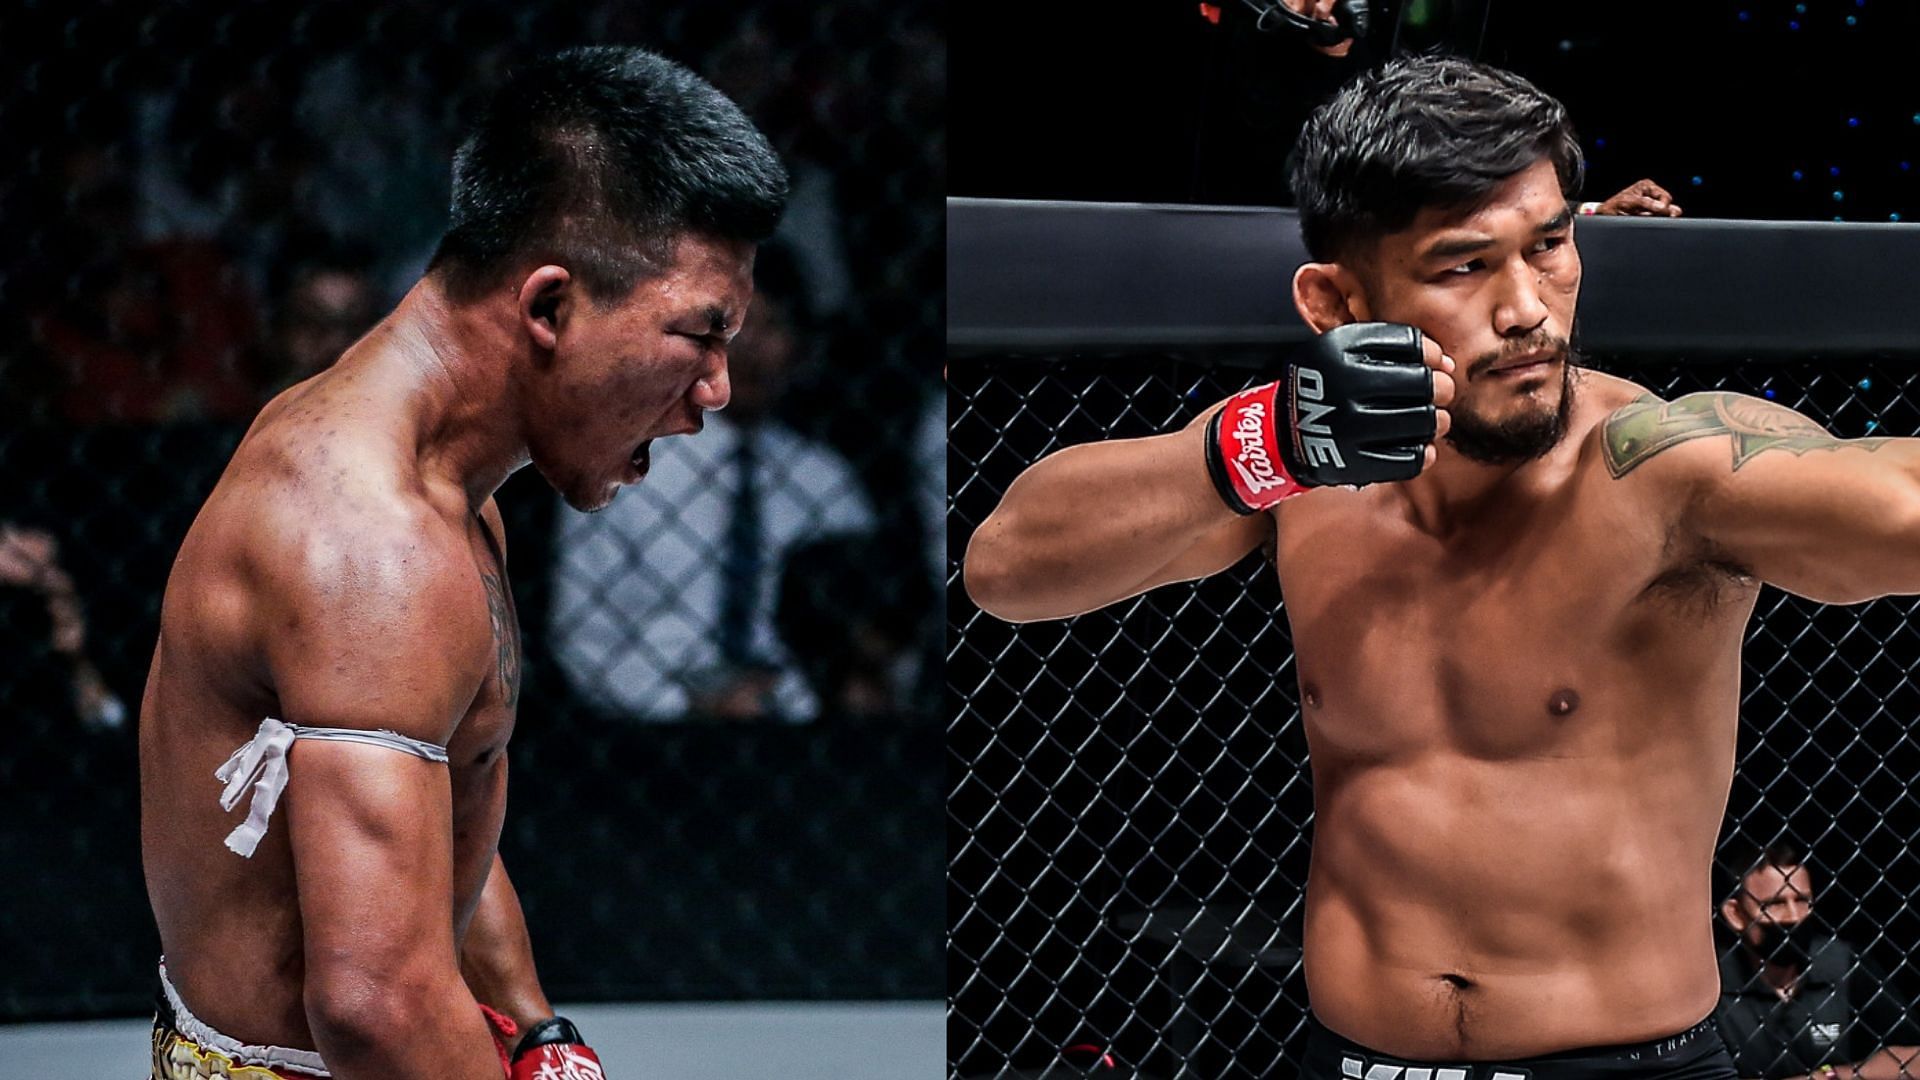 Rodtang hails Aung La N Sang for being an exciting fighter